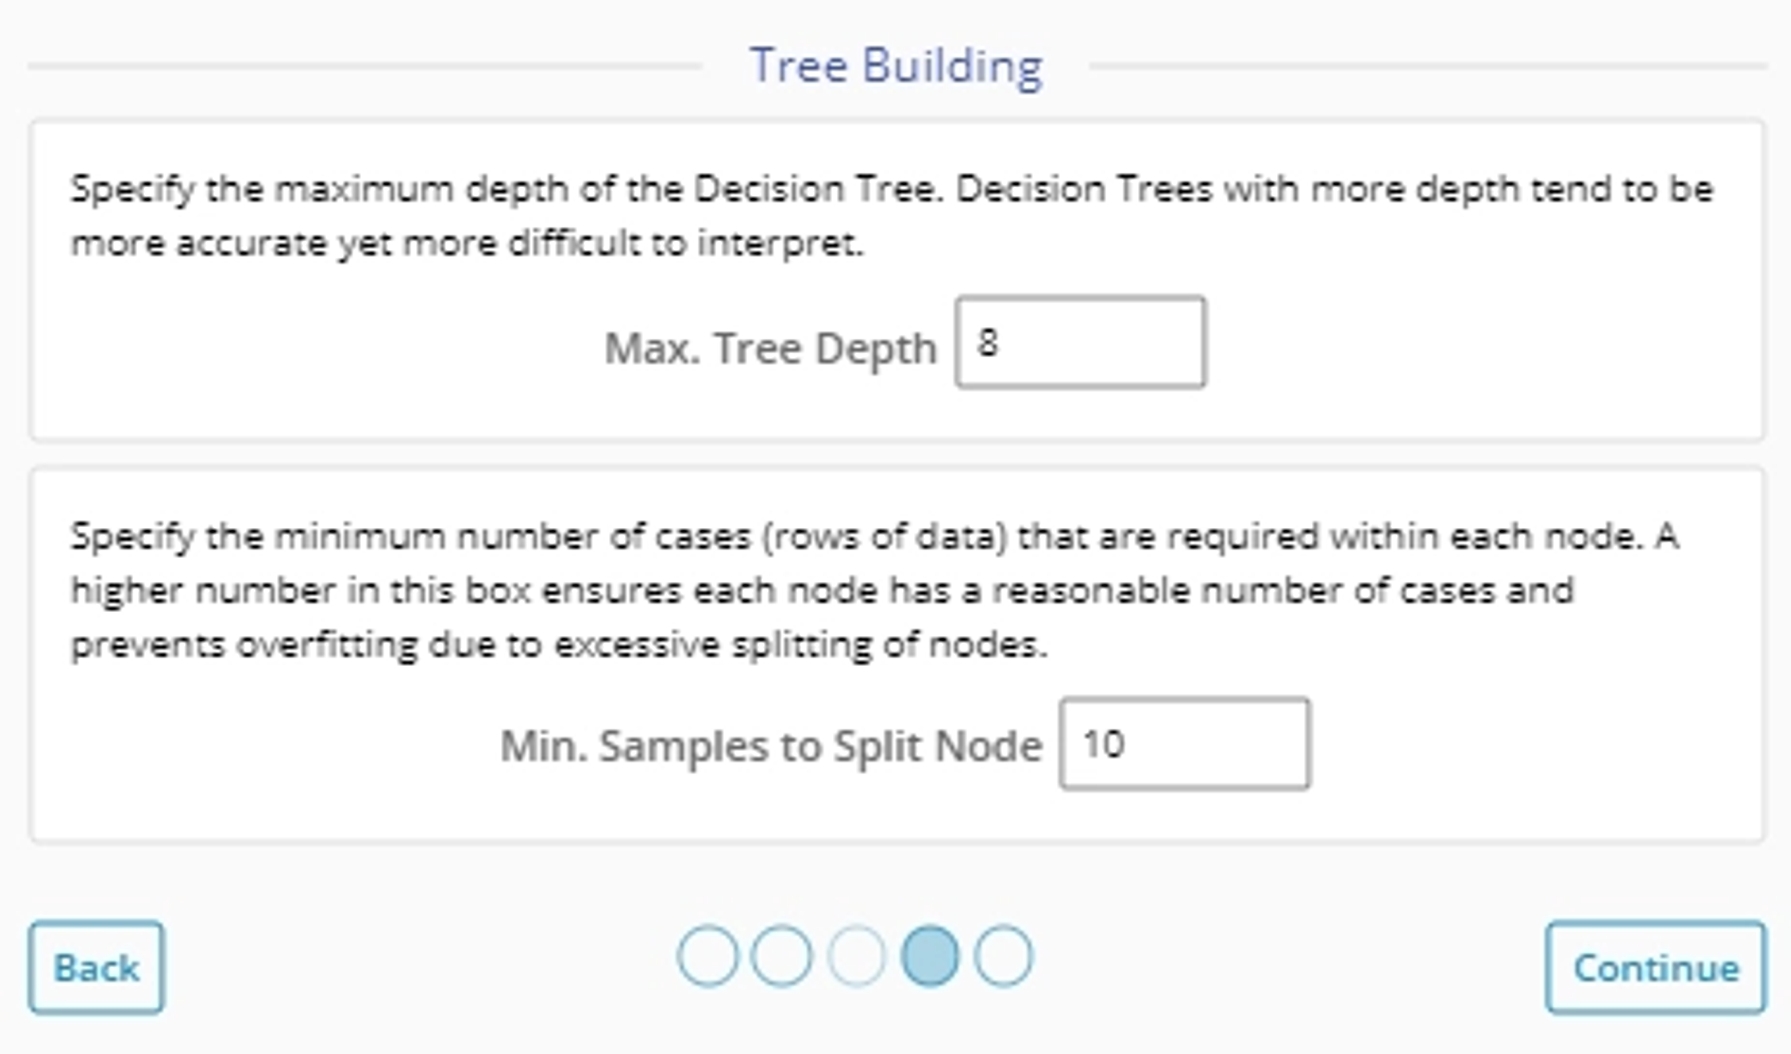 Classification and regression tree with min samples to split added.